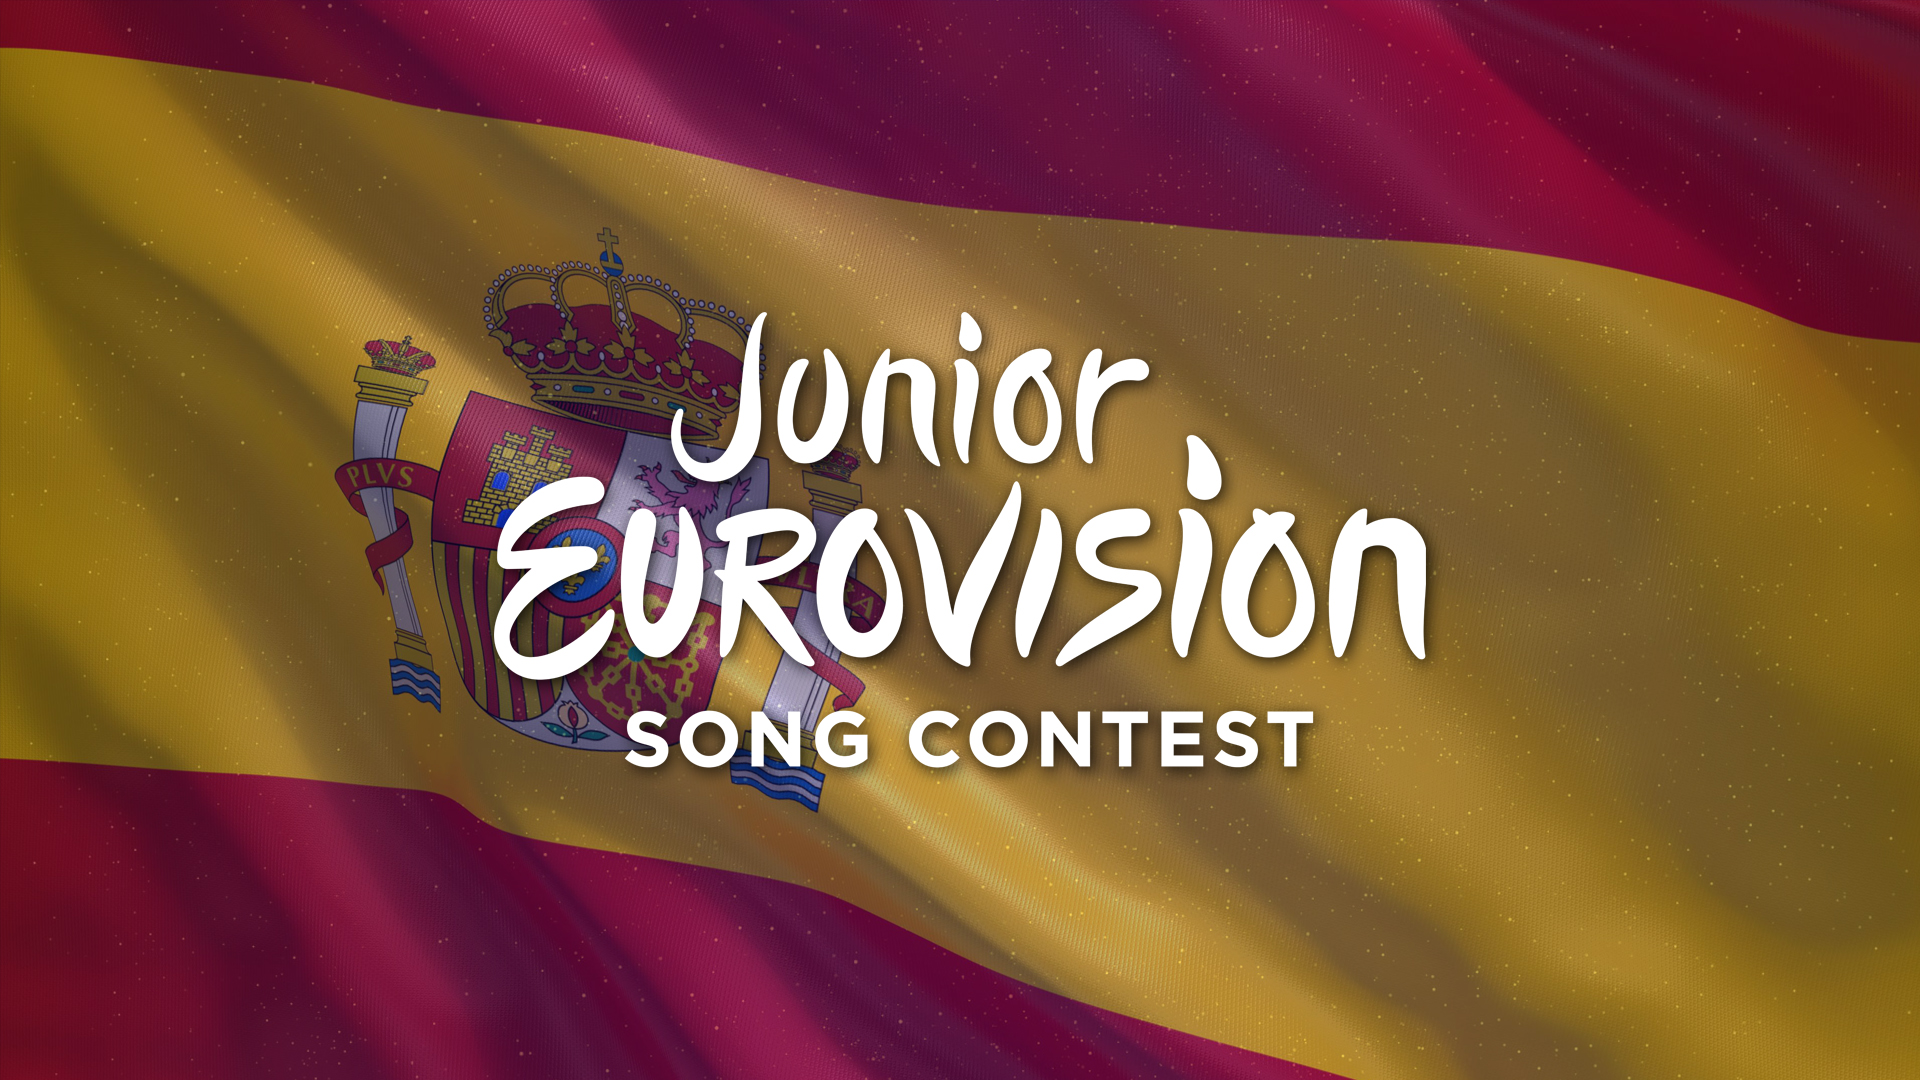 Spain: RTVE will announce all details about its participation in Junior Eurovision 2021 in September